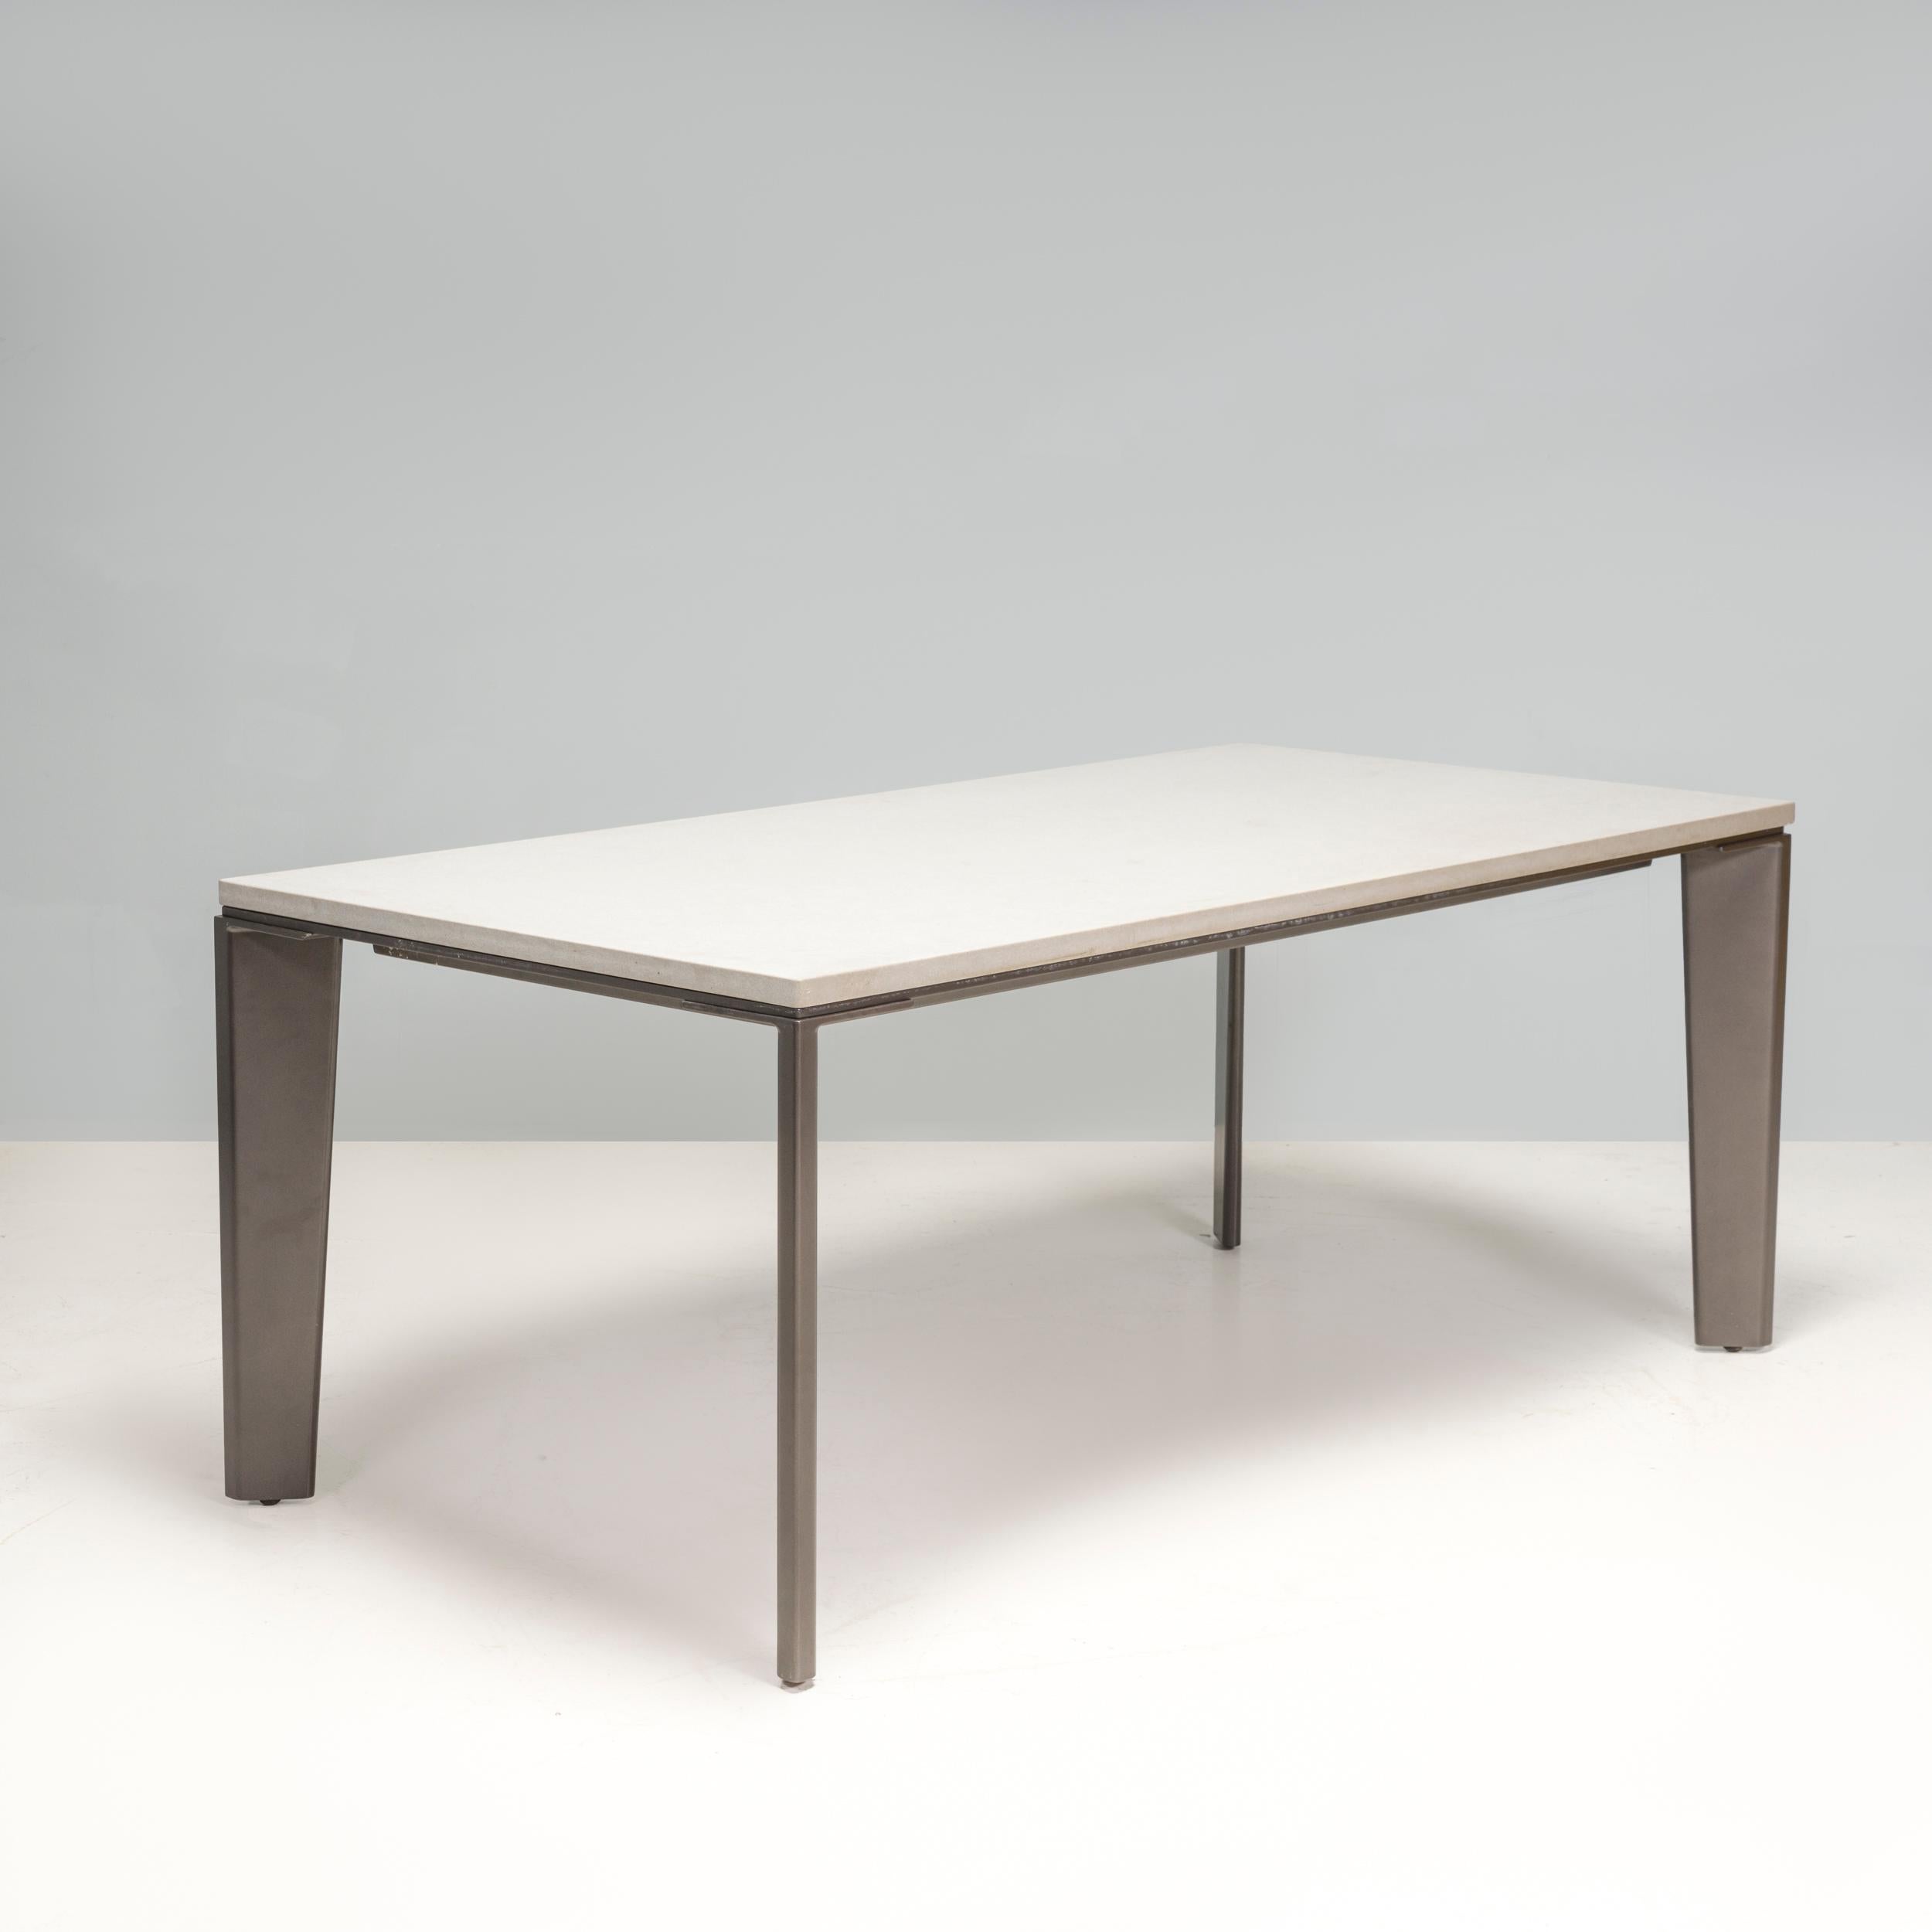 This Keel Outdoor Dining Table was designed by Holly Hunt and made in 2022. Casually sophisticated with a modern aesthetic, it has a rectangular white surface which contrasts with the black supporting structure that border it. 

The angled shape of